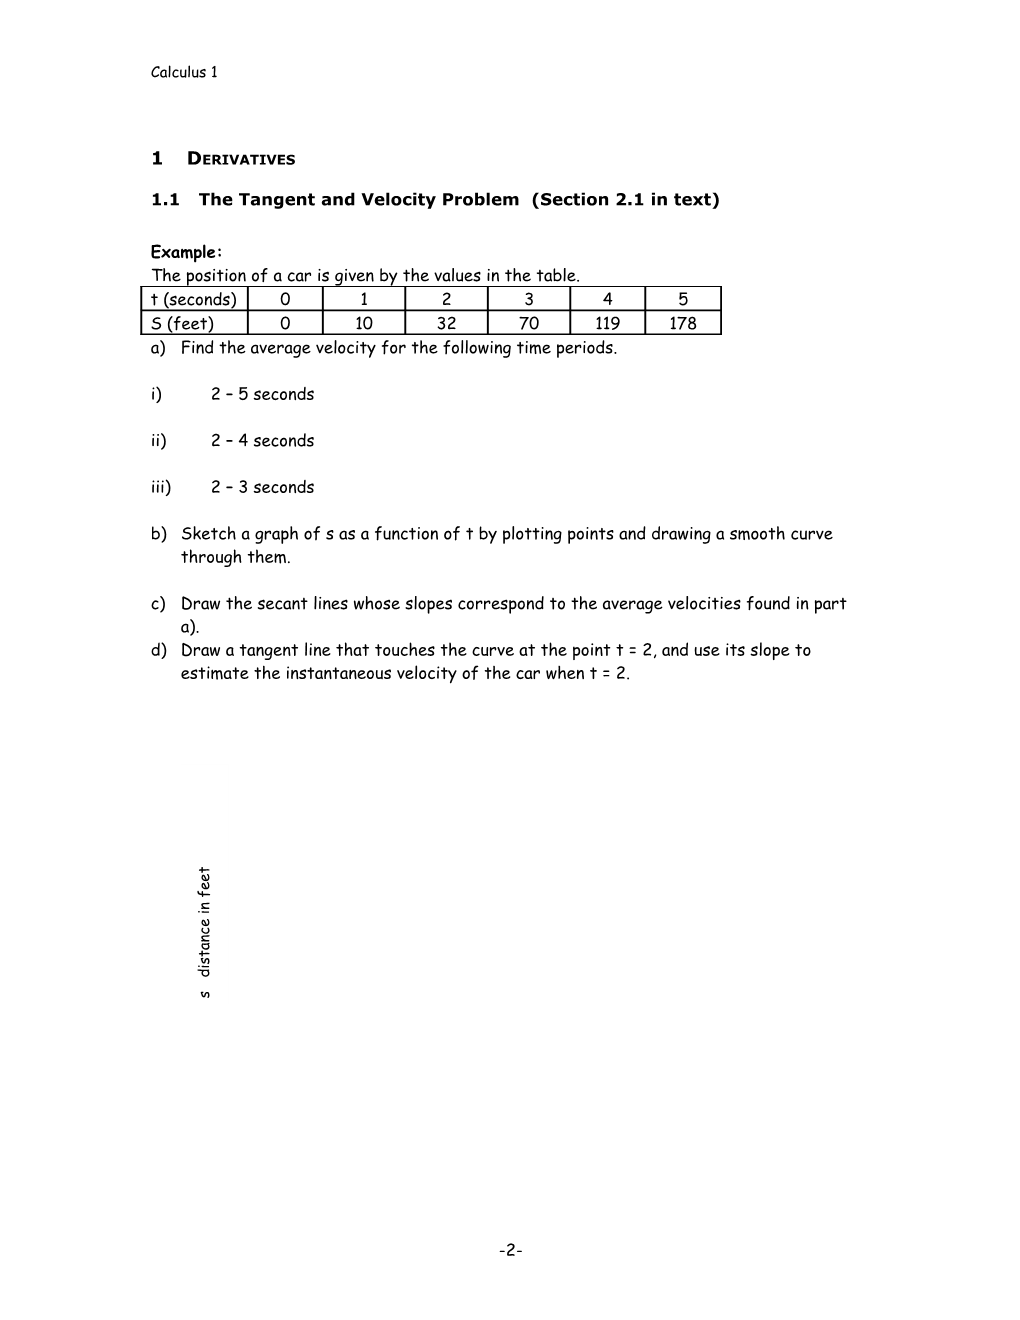 1.1 the Tangent and Velocity Problem (Section 2.1 in Text)